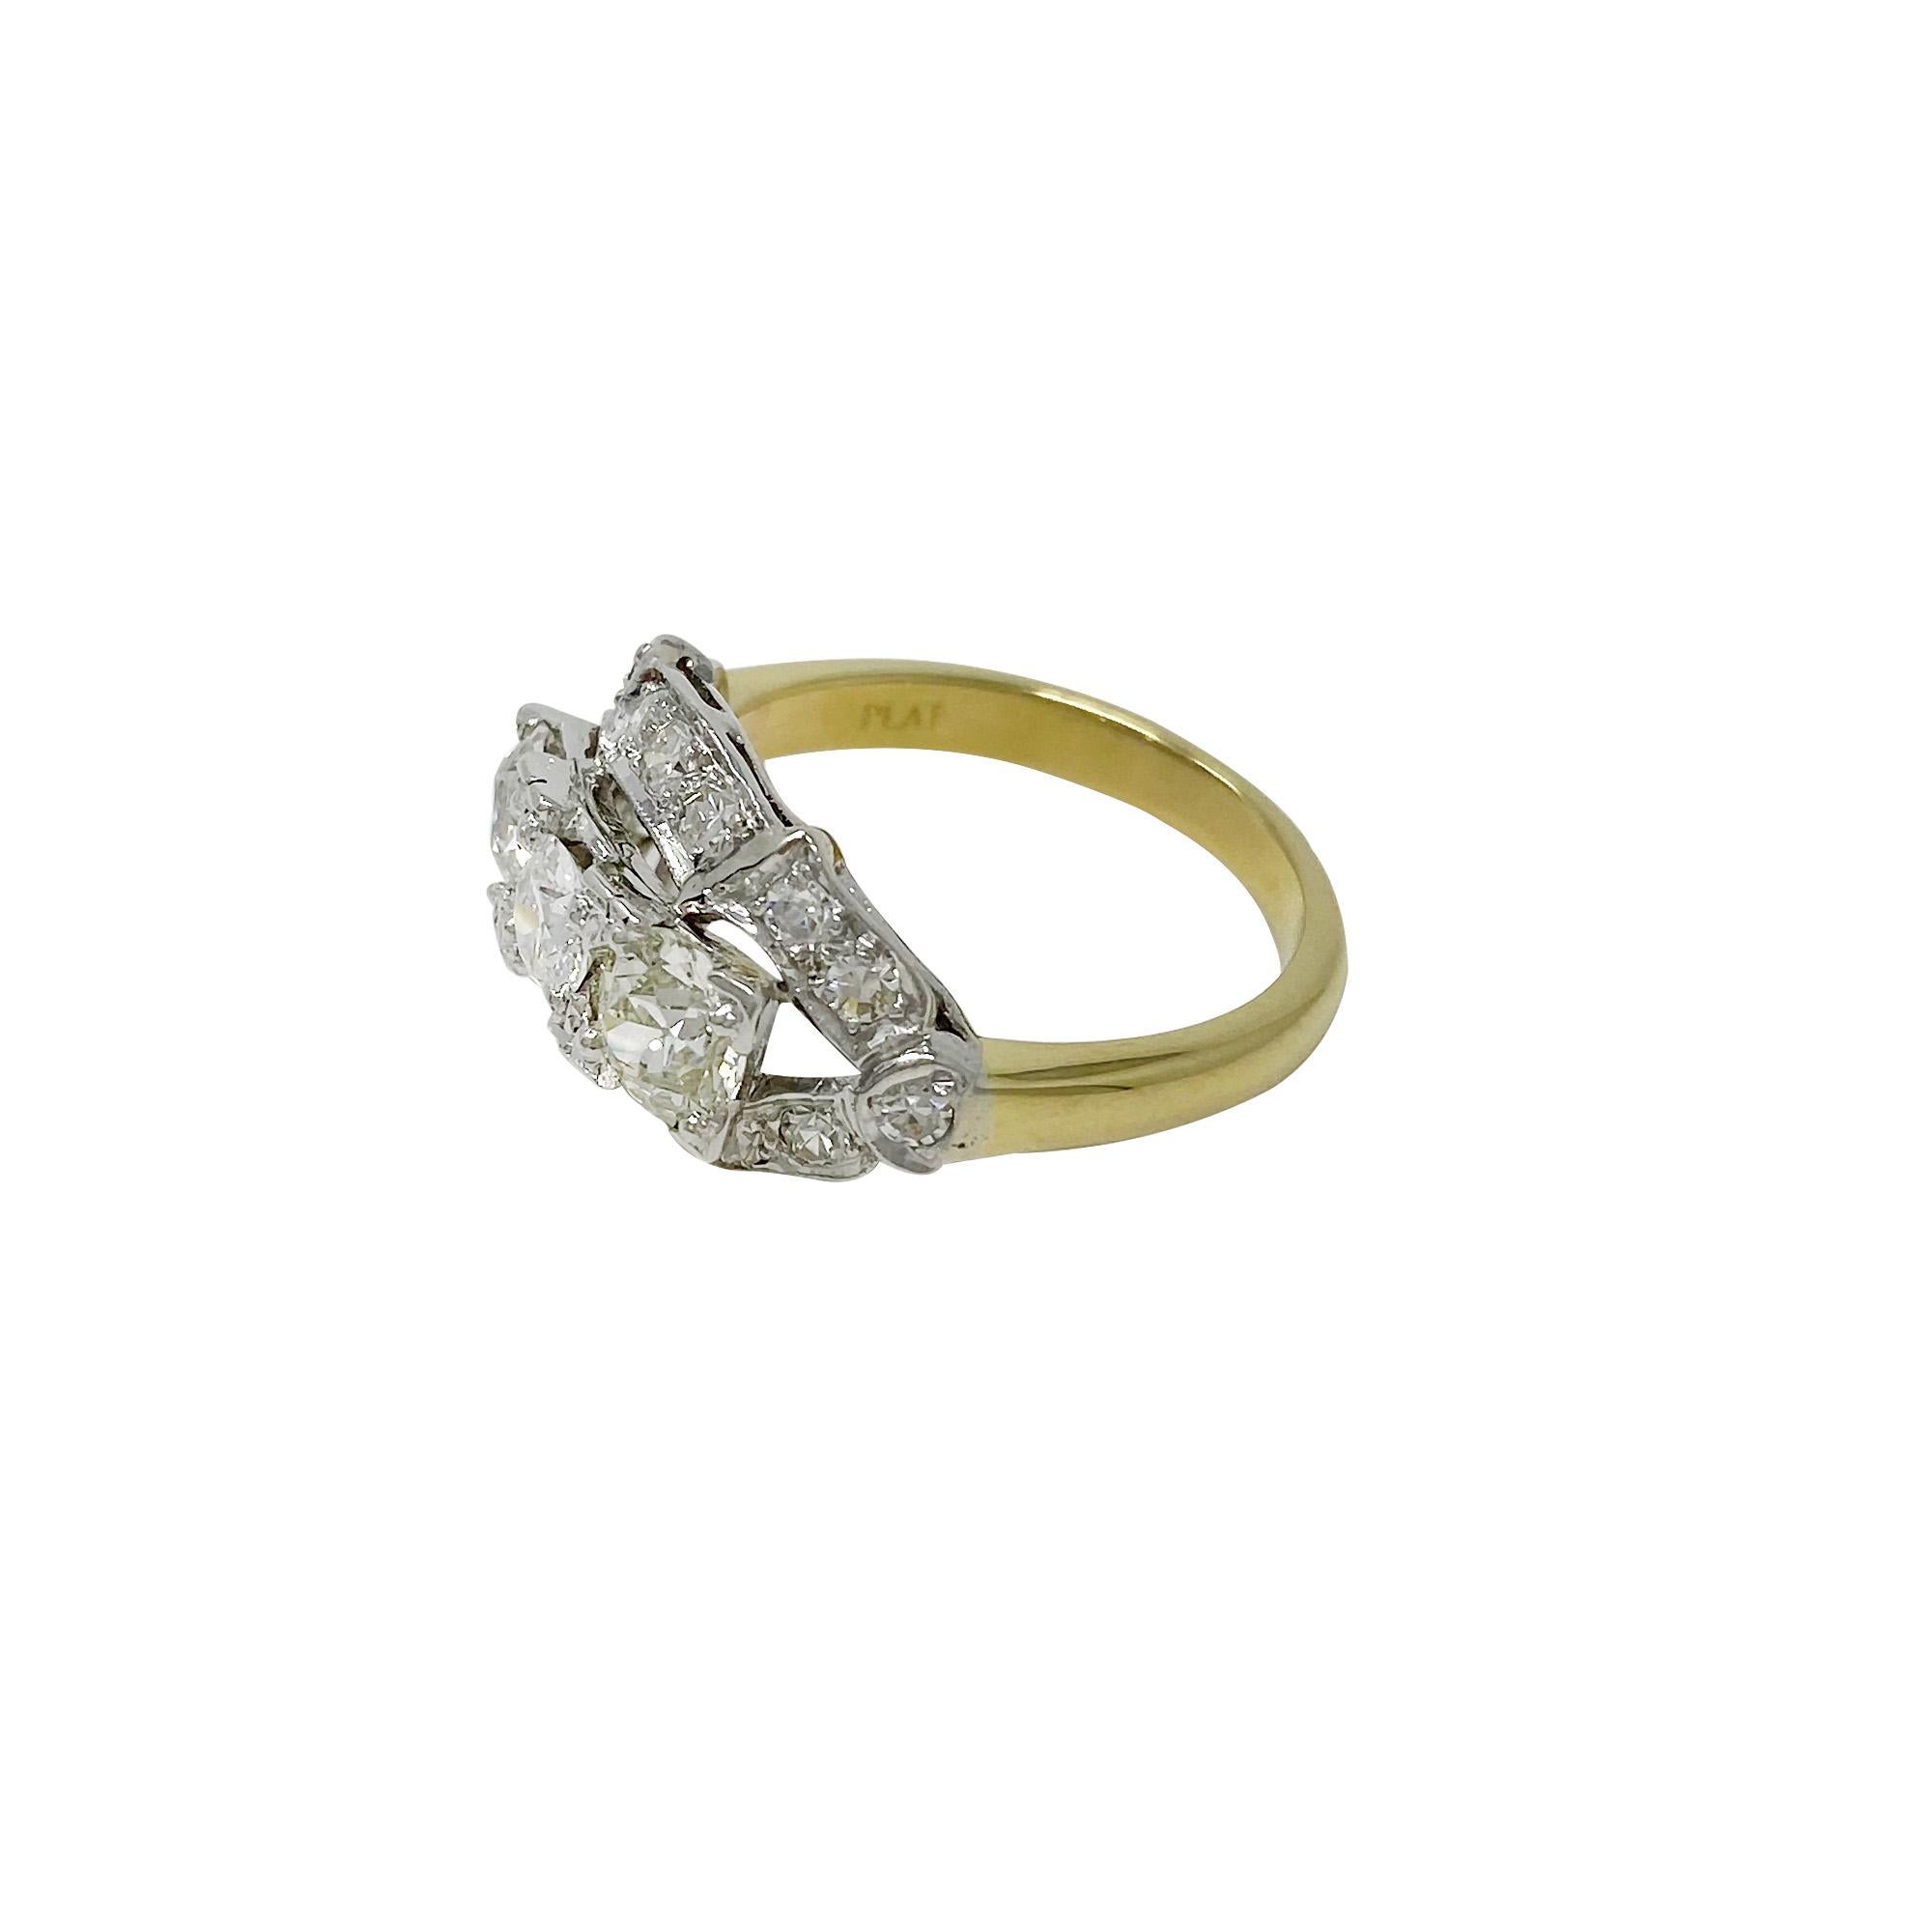 Platinum Yellow Gold 1.45 Carat Diamond Ring In Good Condition For Sale In Dallas, TX